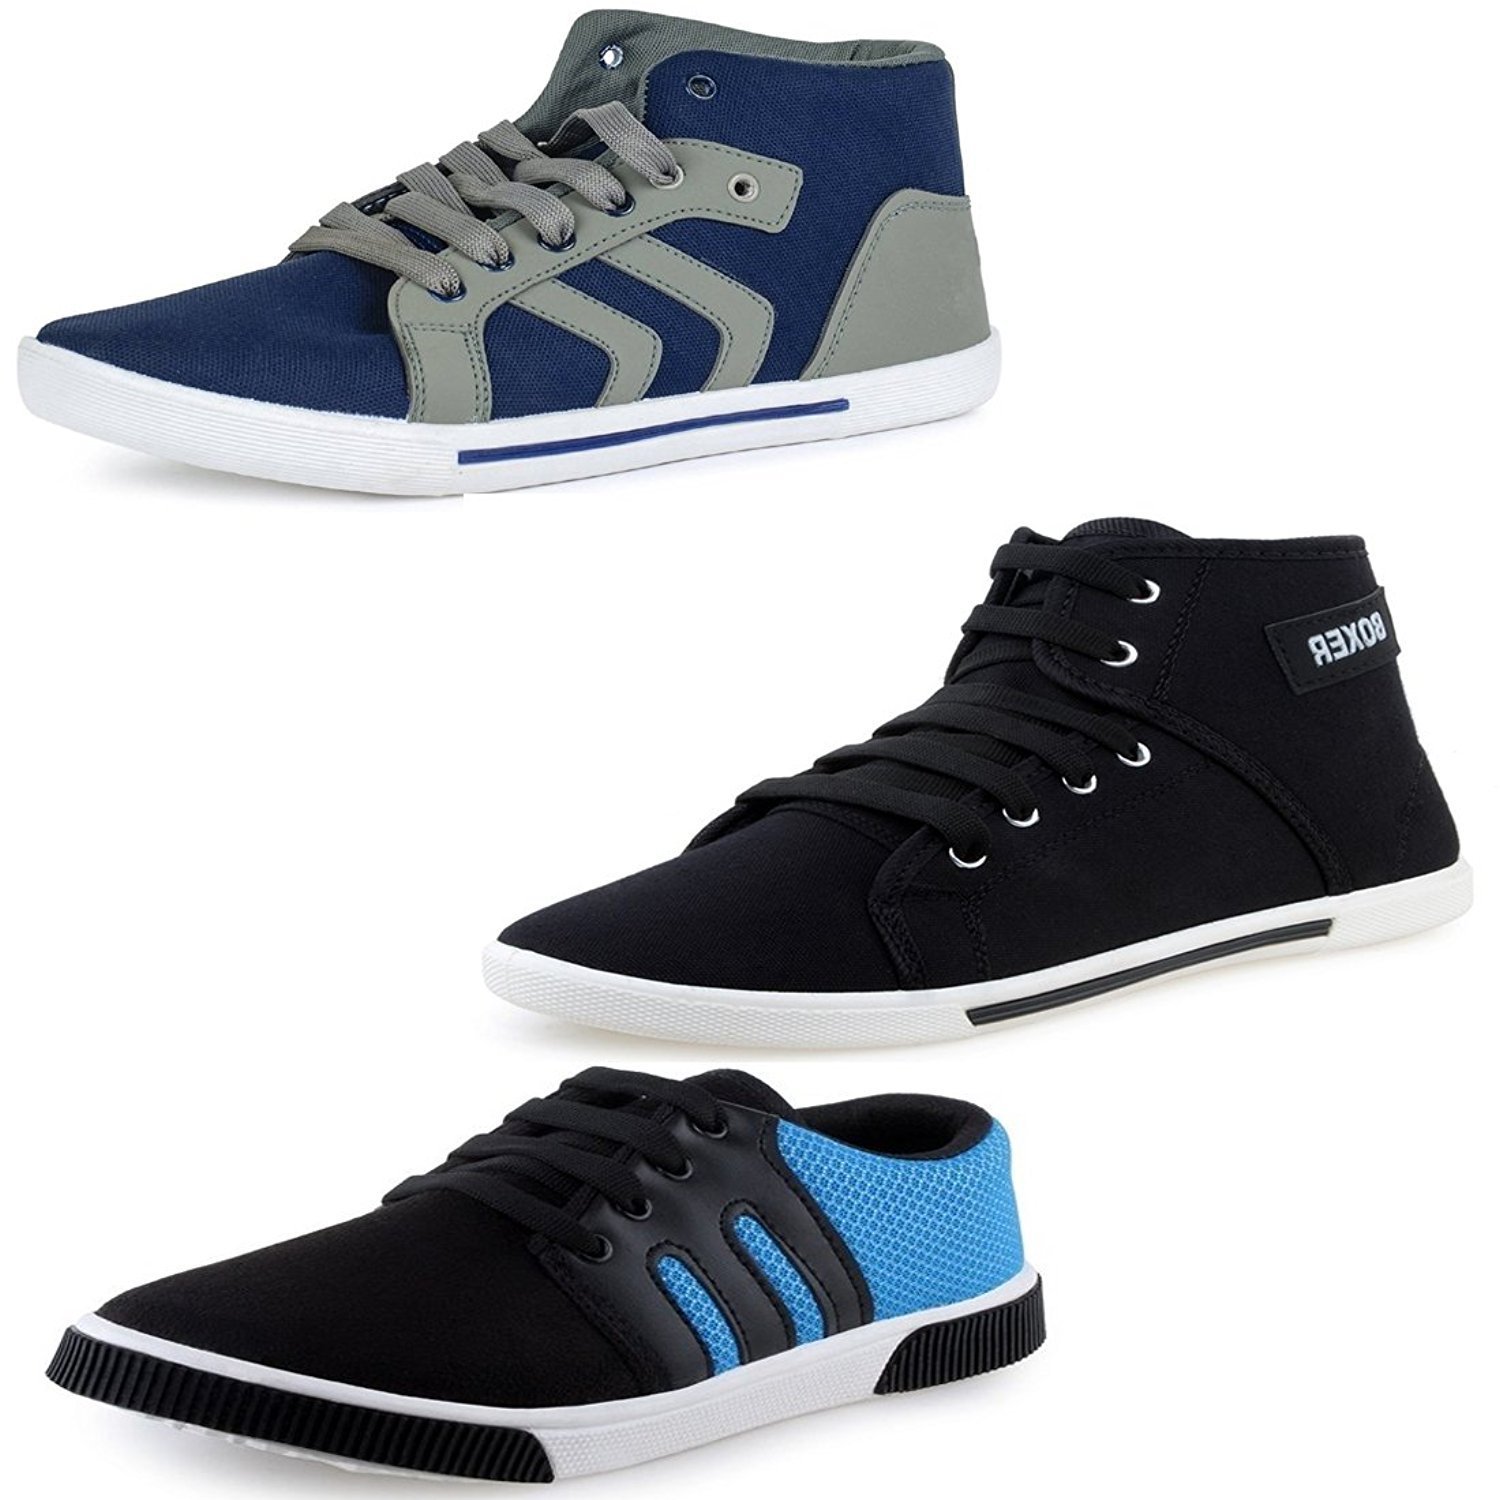 MEN'S NAVY BOOT BOXER AND SNEAKER SHOES COMBO PACK OF 3: Buy Online ...